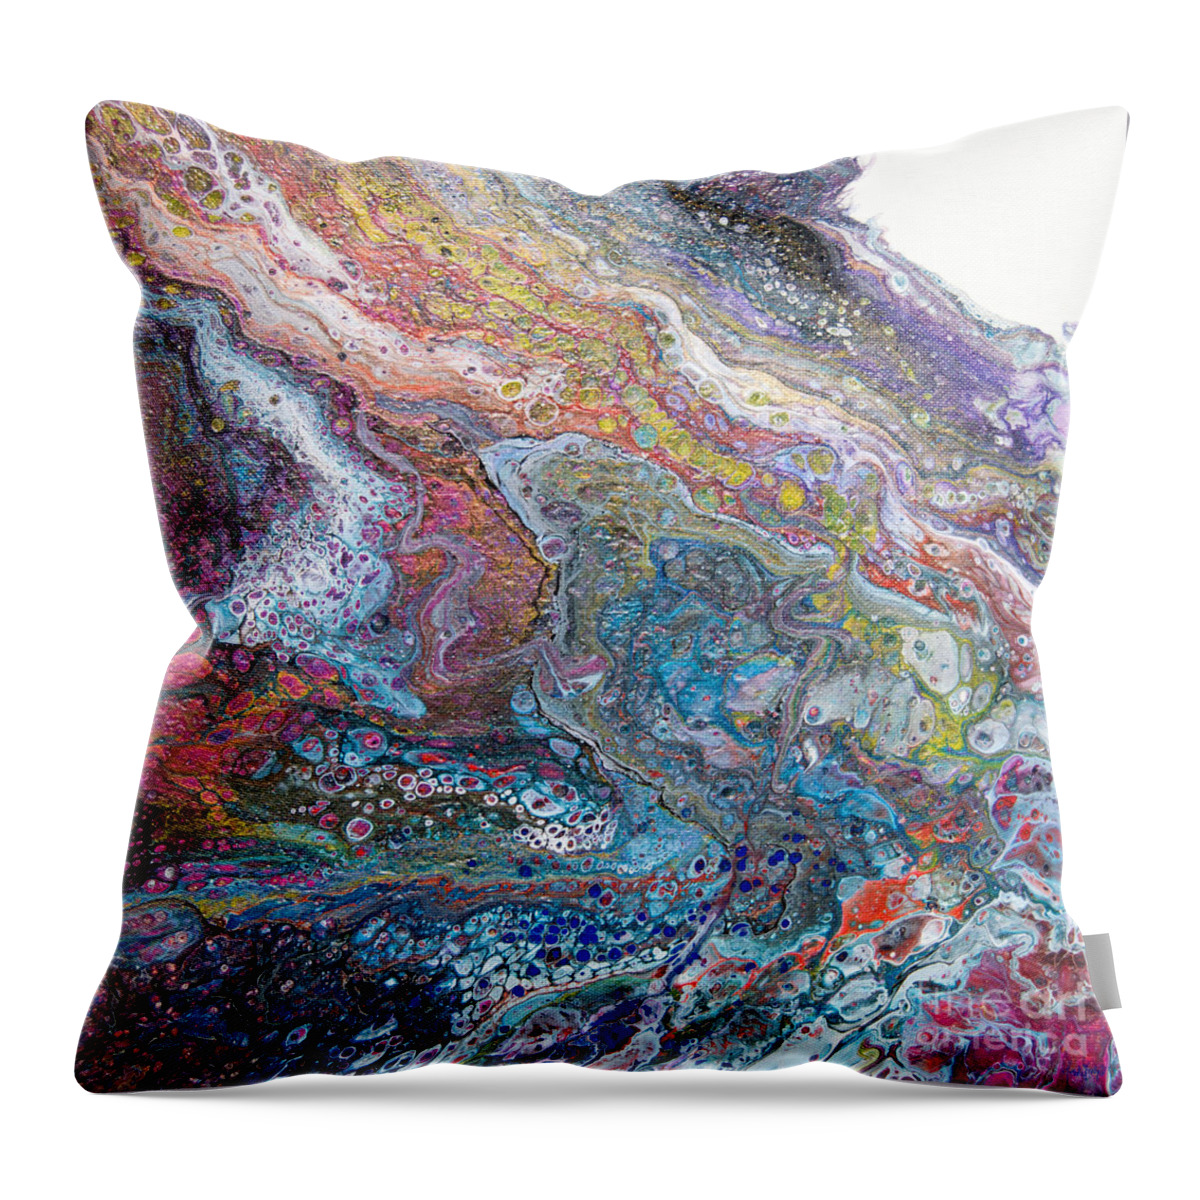 Fluid Art Acrylics Soft Glowing Colorful Gracefull Patterns Shades Of Blue And A Rainbow Throw Pillow featuring the painting My Pet Purple dragon Peeking by Priscilla Batzell Expressionist Art Studio Gallery